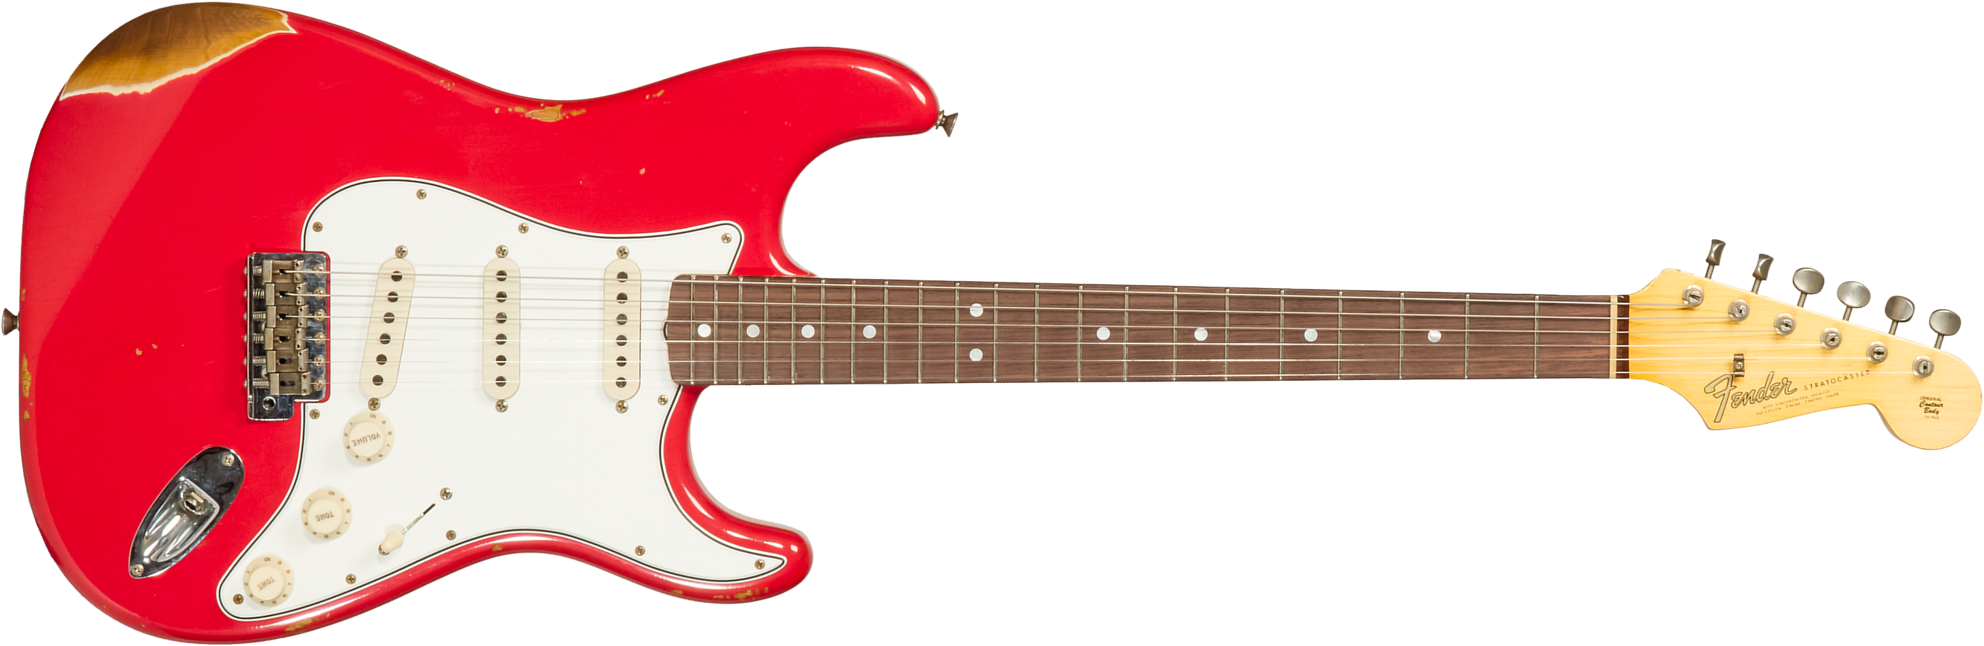 Fender Custom Shop Strat Late 1964 3s Trem Rw #cz568395 - Relic Aged Fiesta Red - Str shape electric guitar - Main picture